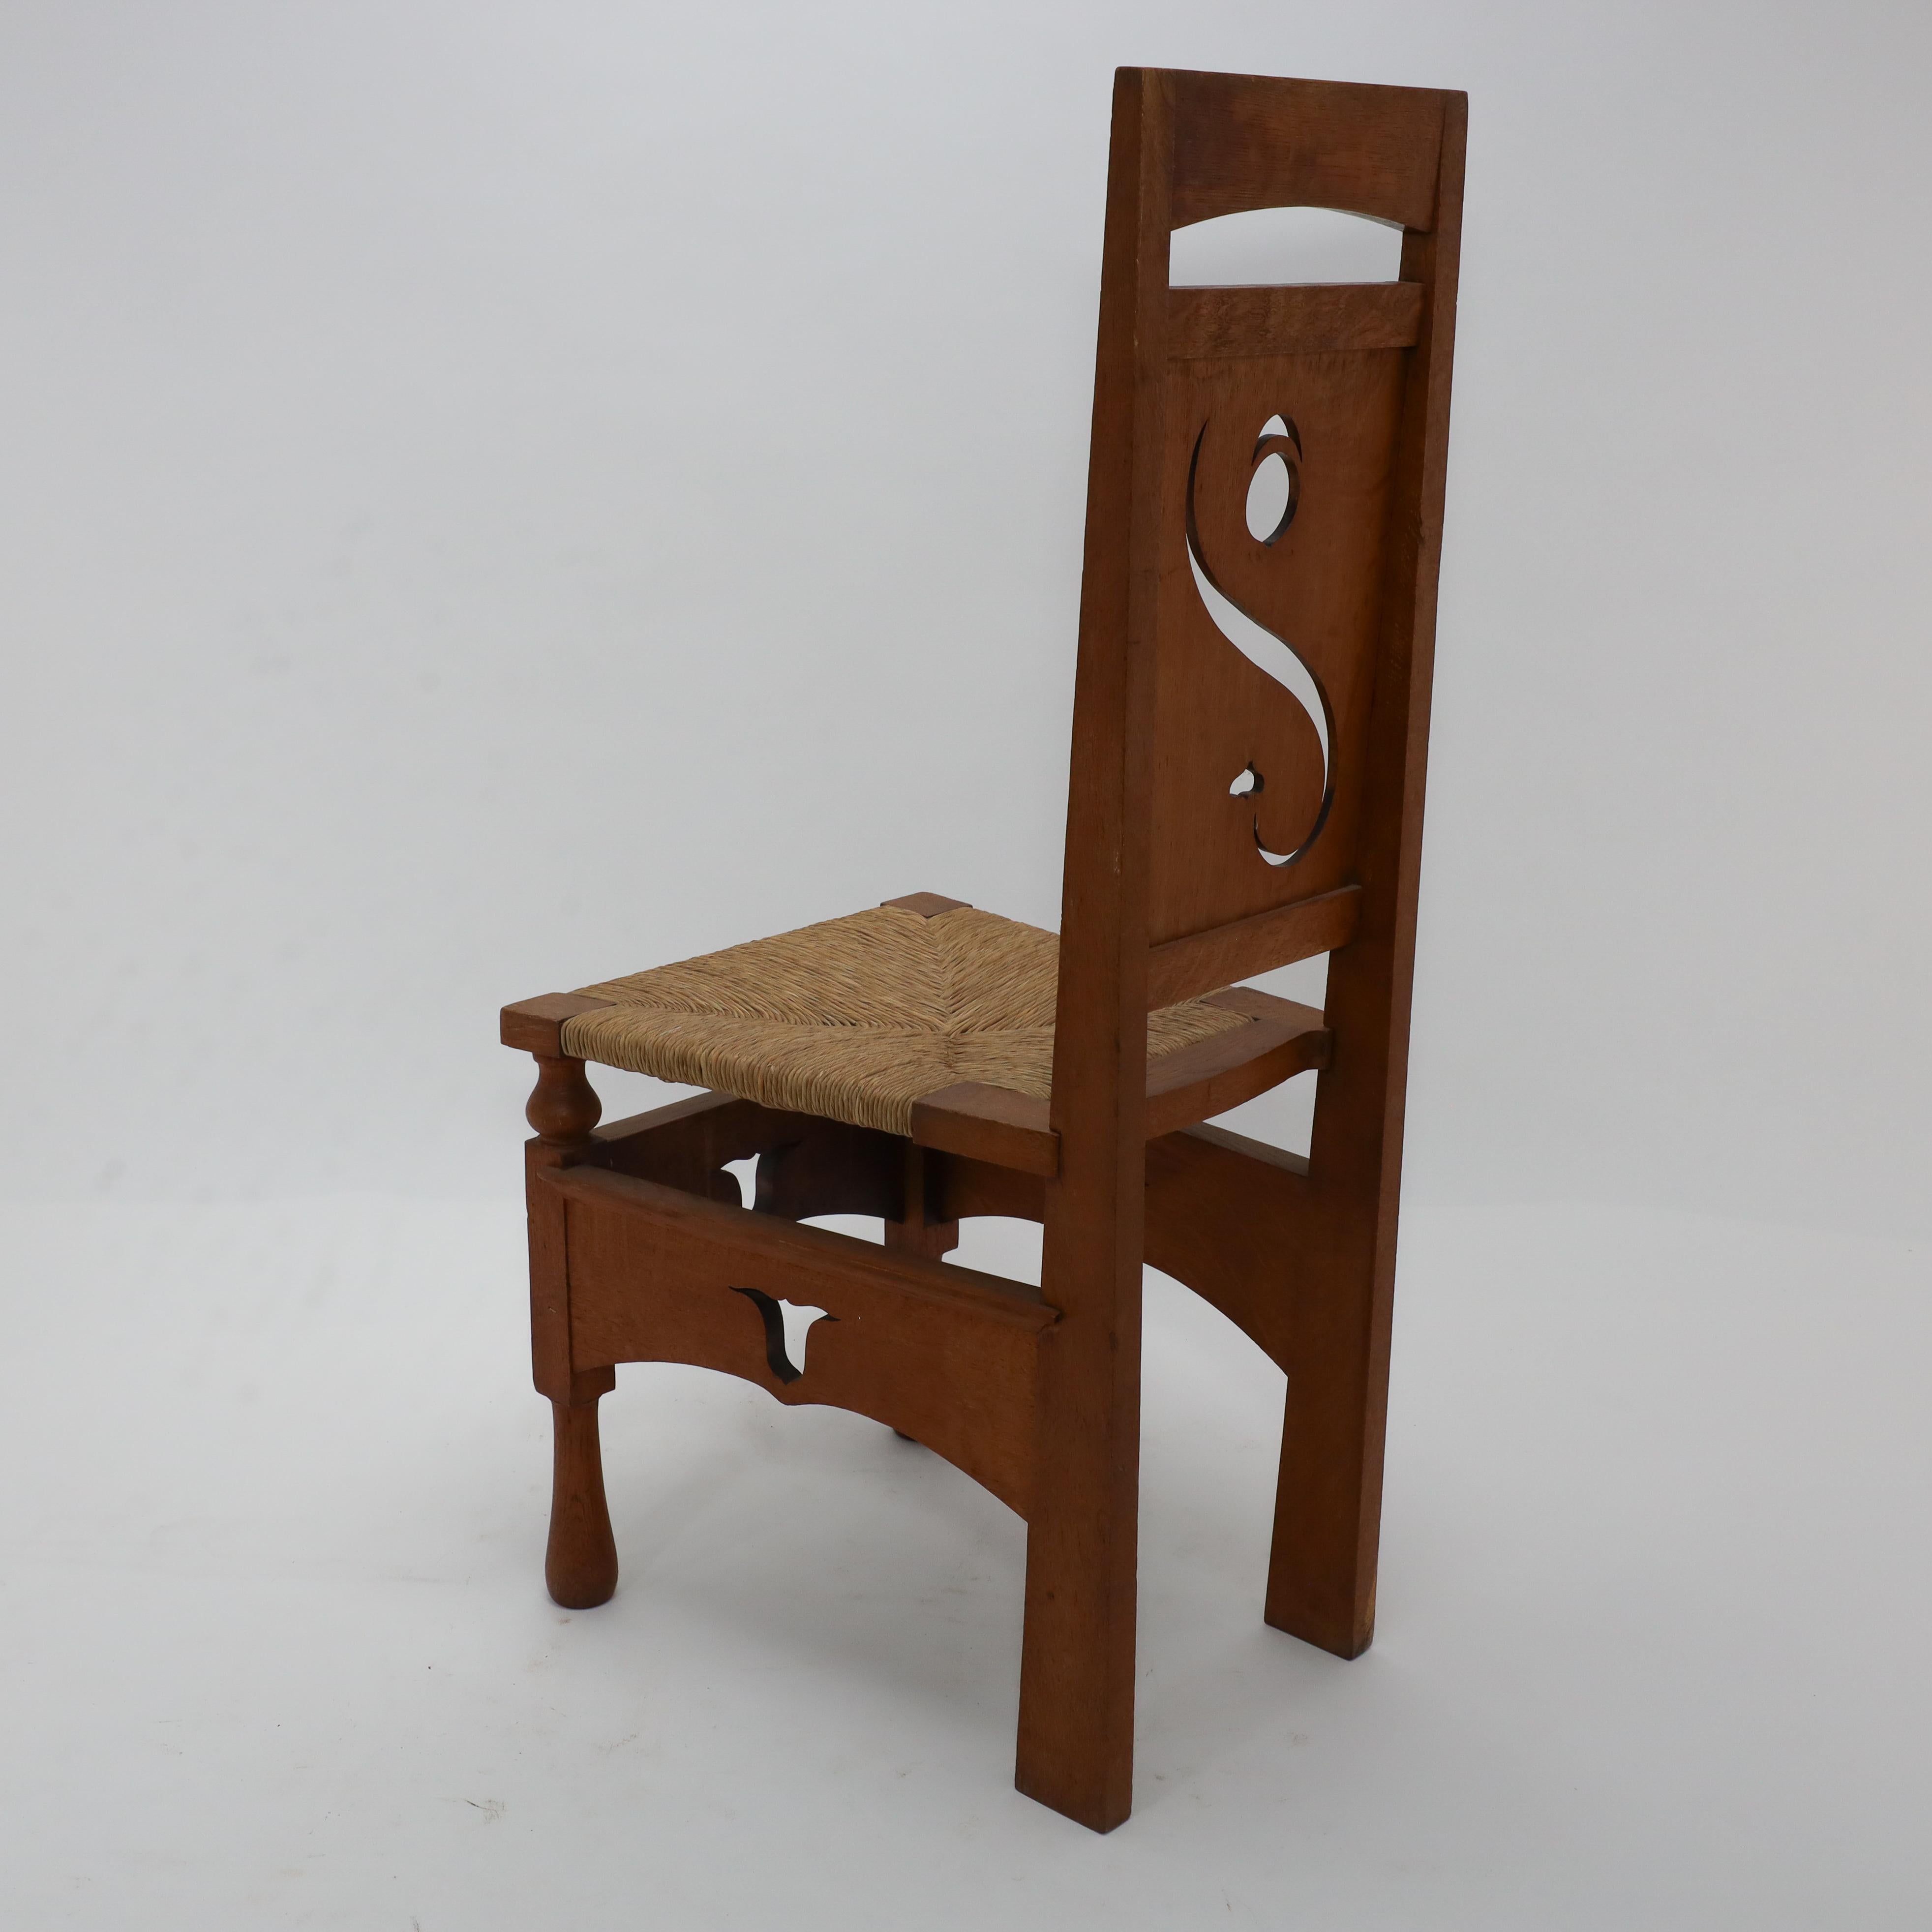 M H Baillie Scott attri An Arts & Crafts Oak Chair With Stylised Floral Cut-Outs For Sale 9